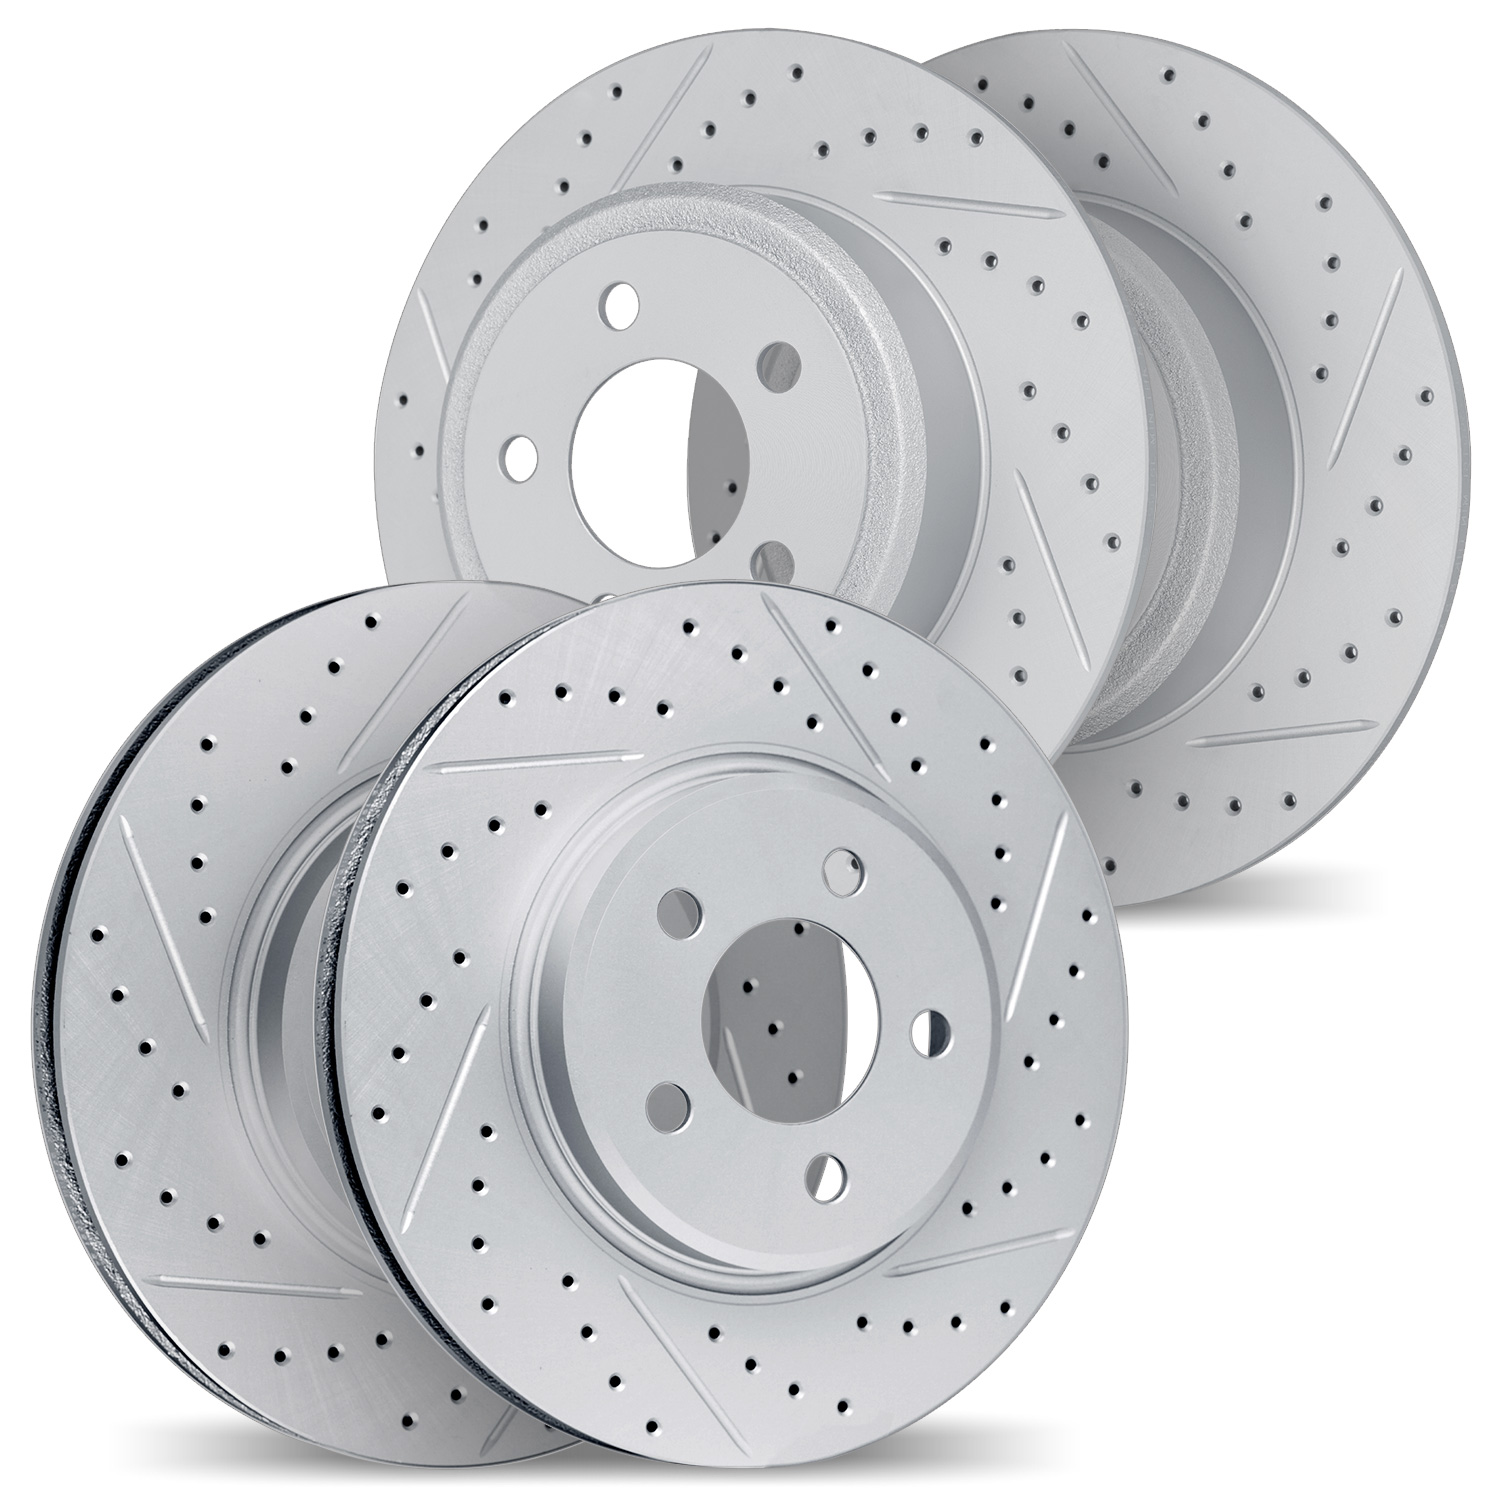 2004-67067 Geoperformance Drilled/Slotted Brake Rotors, Fits Select Infiniti/Nissan, Position: Front and Rear